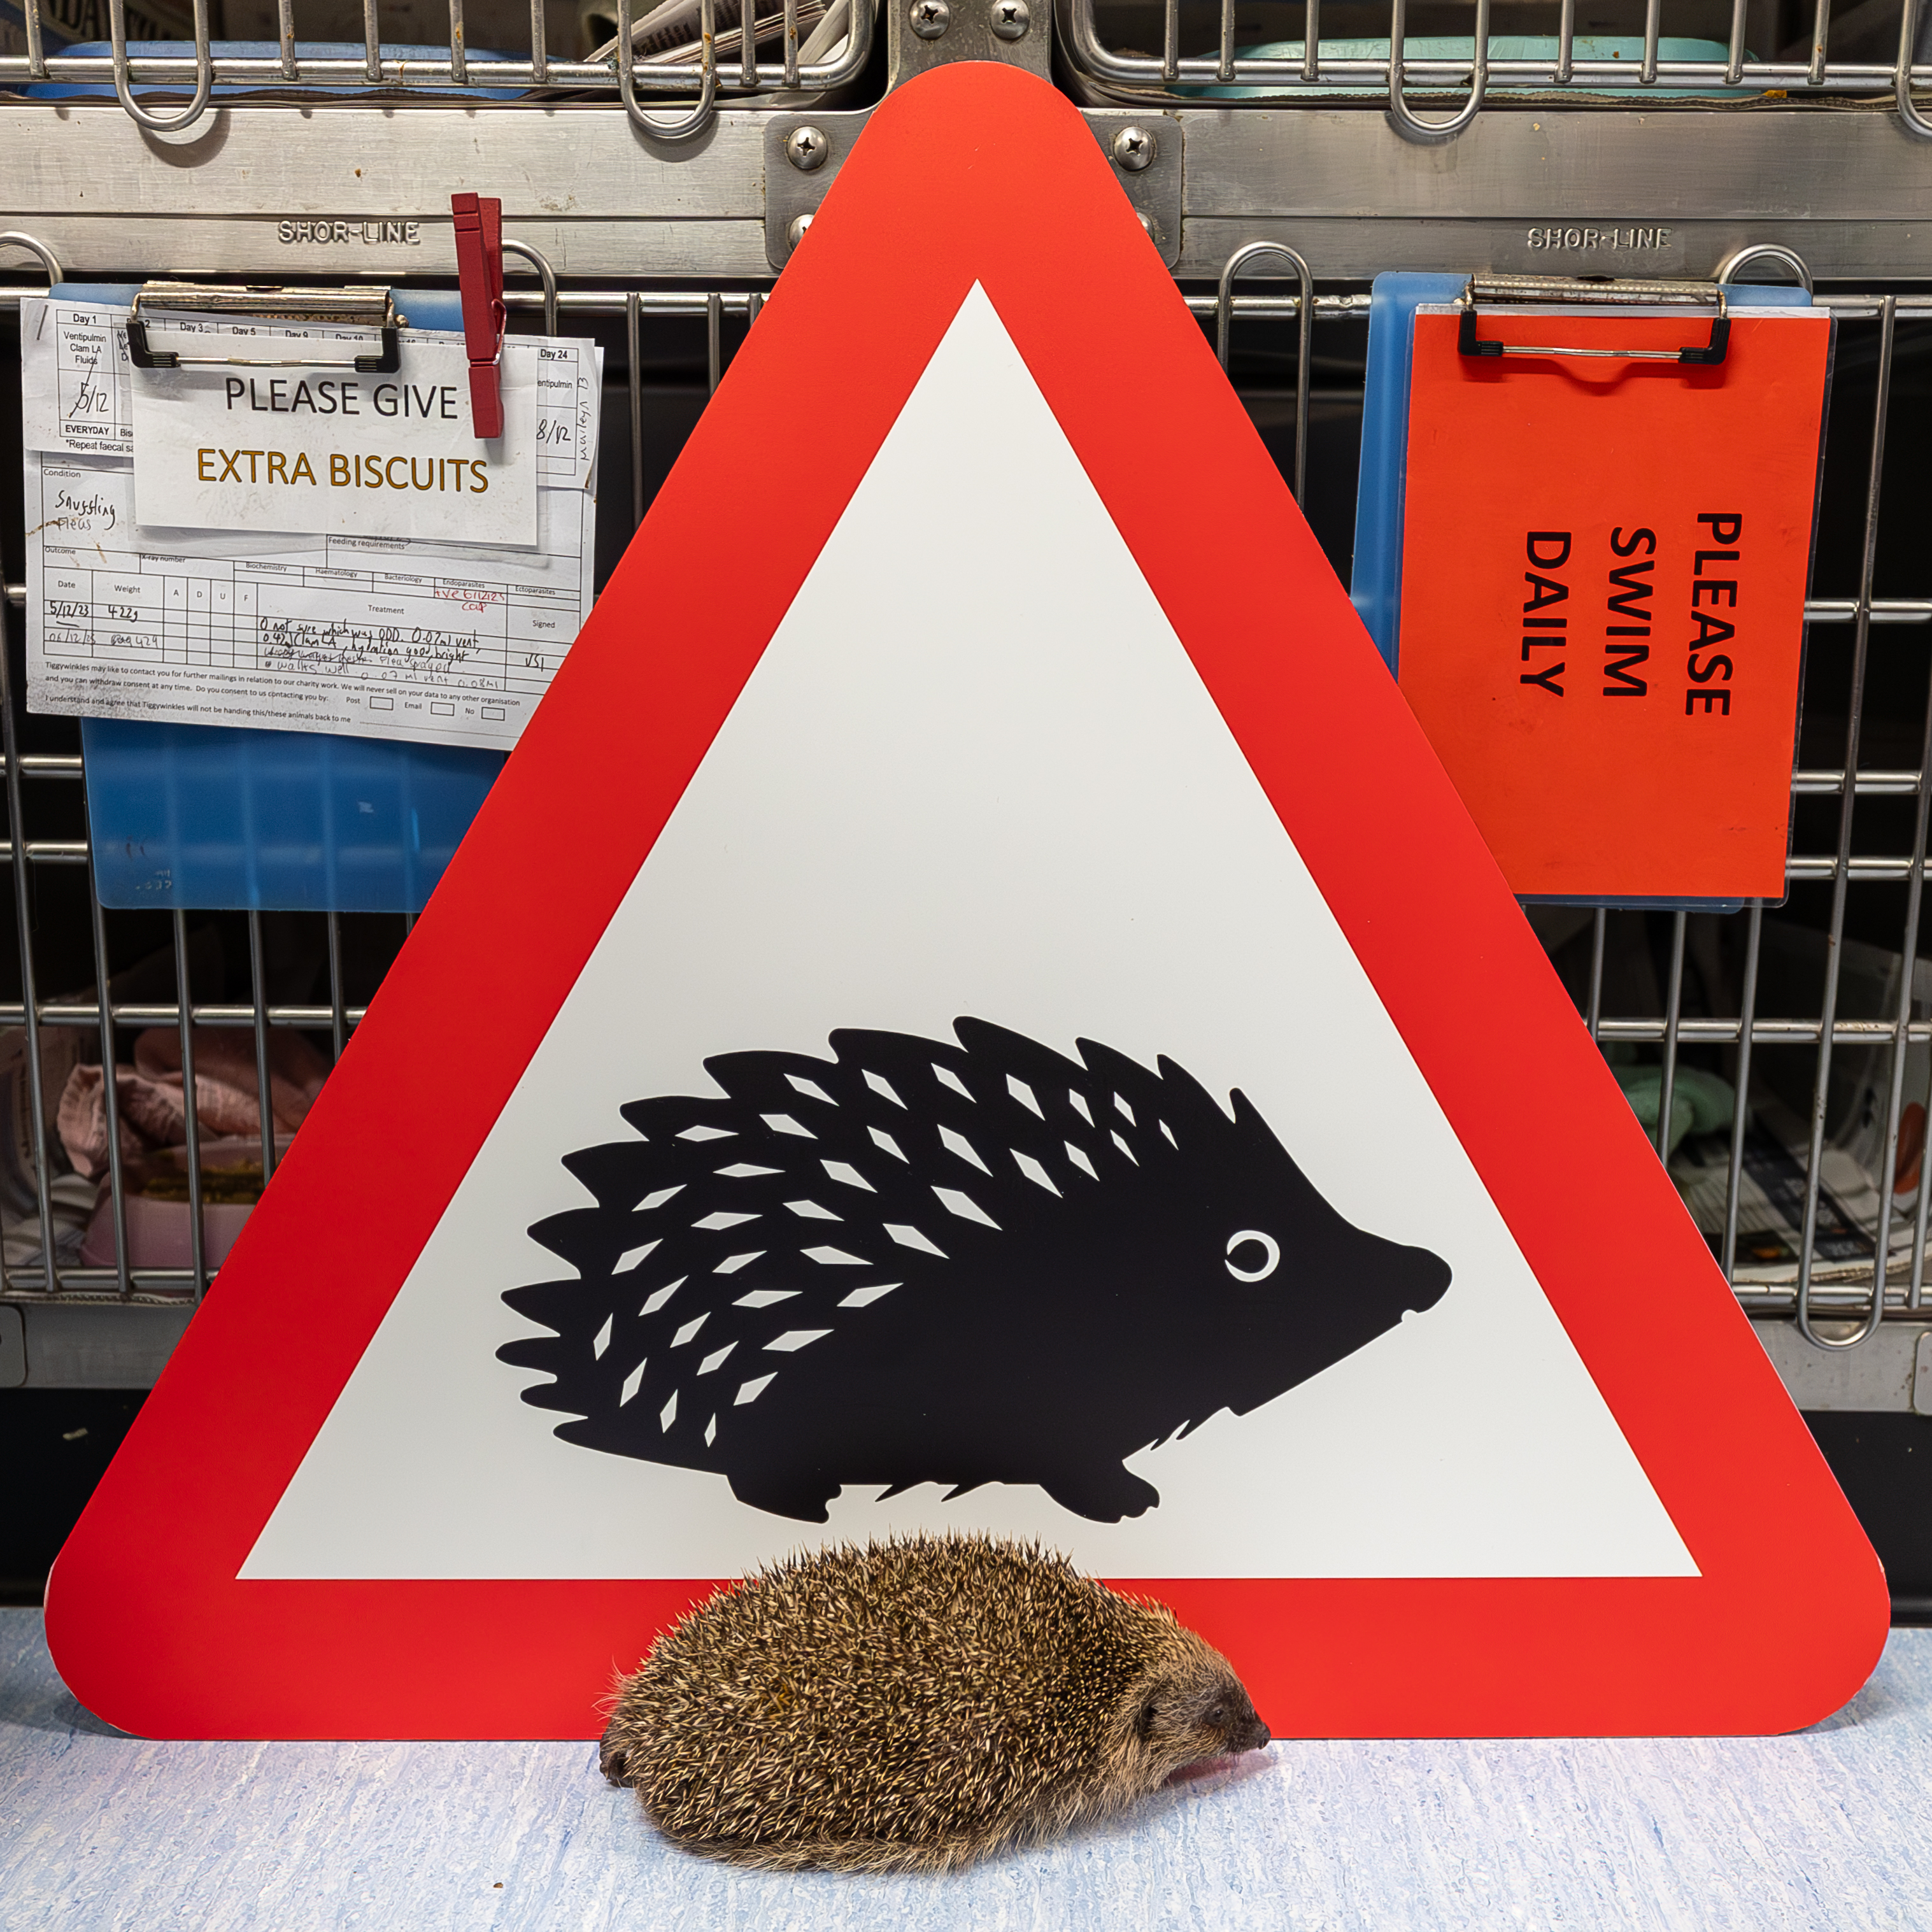 A hedgehog in front of the small mammals road sign